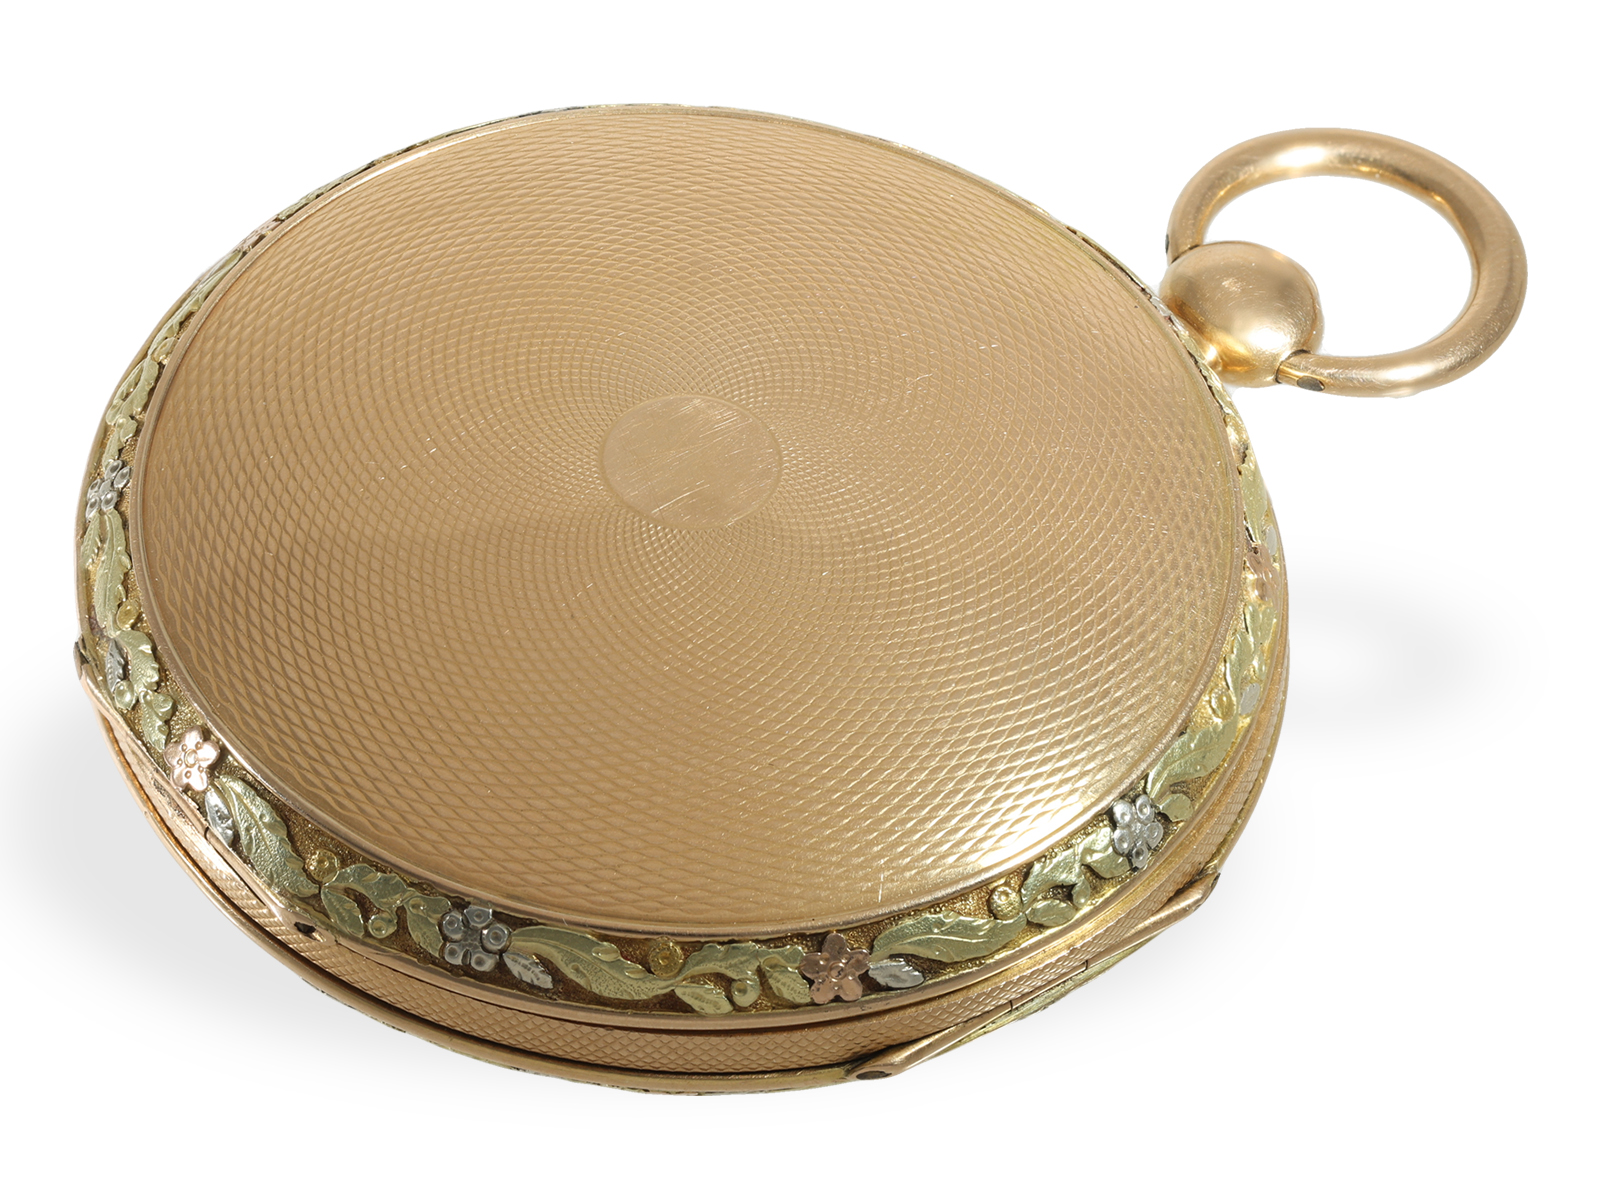 Pocket watch: exceptionally large, very fine verge watch with 4-colour gold case, ca. 1820 - Image 4 of 7